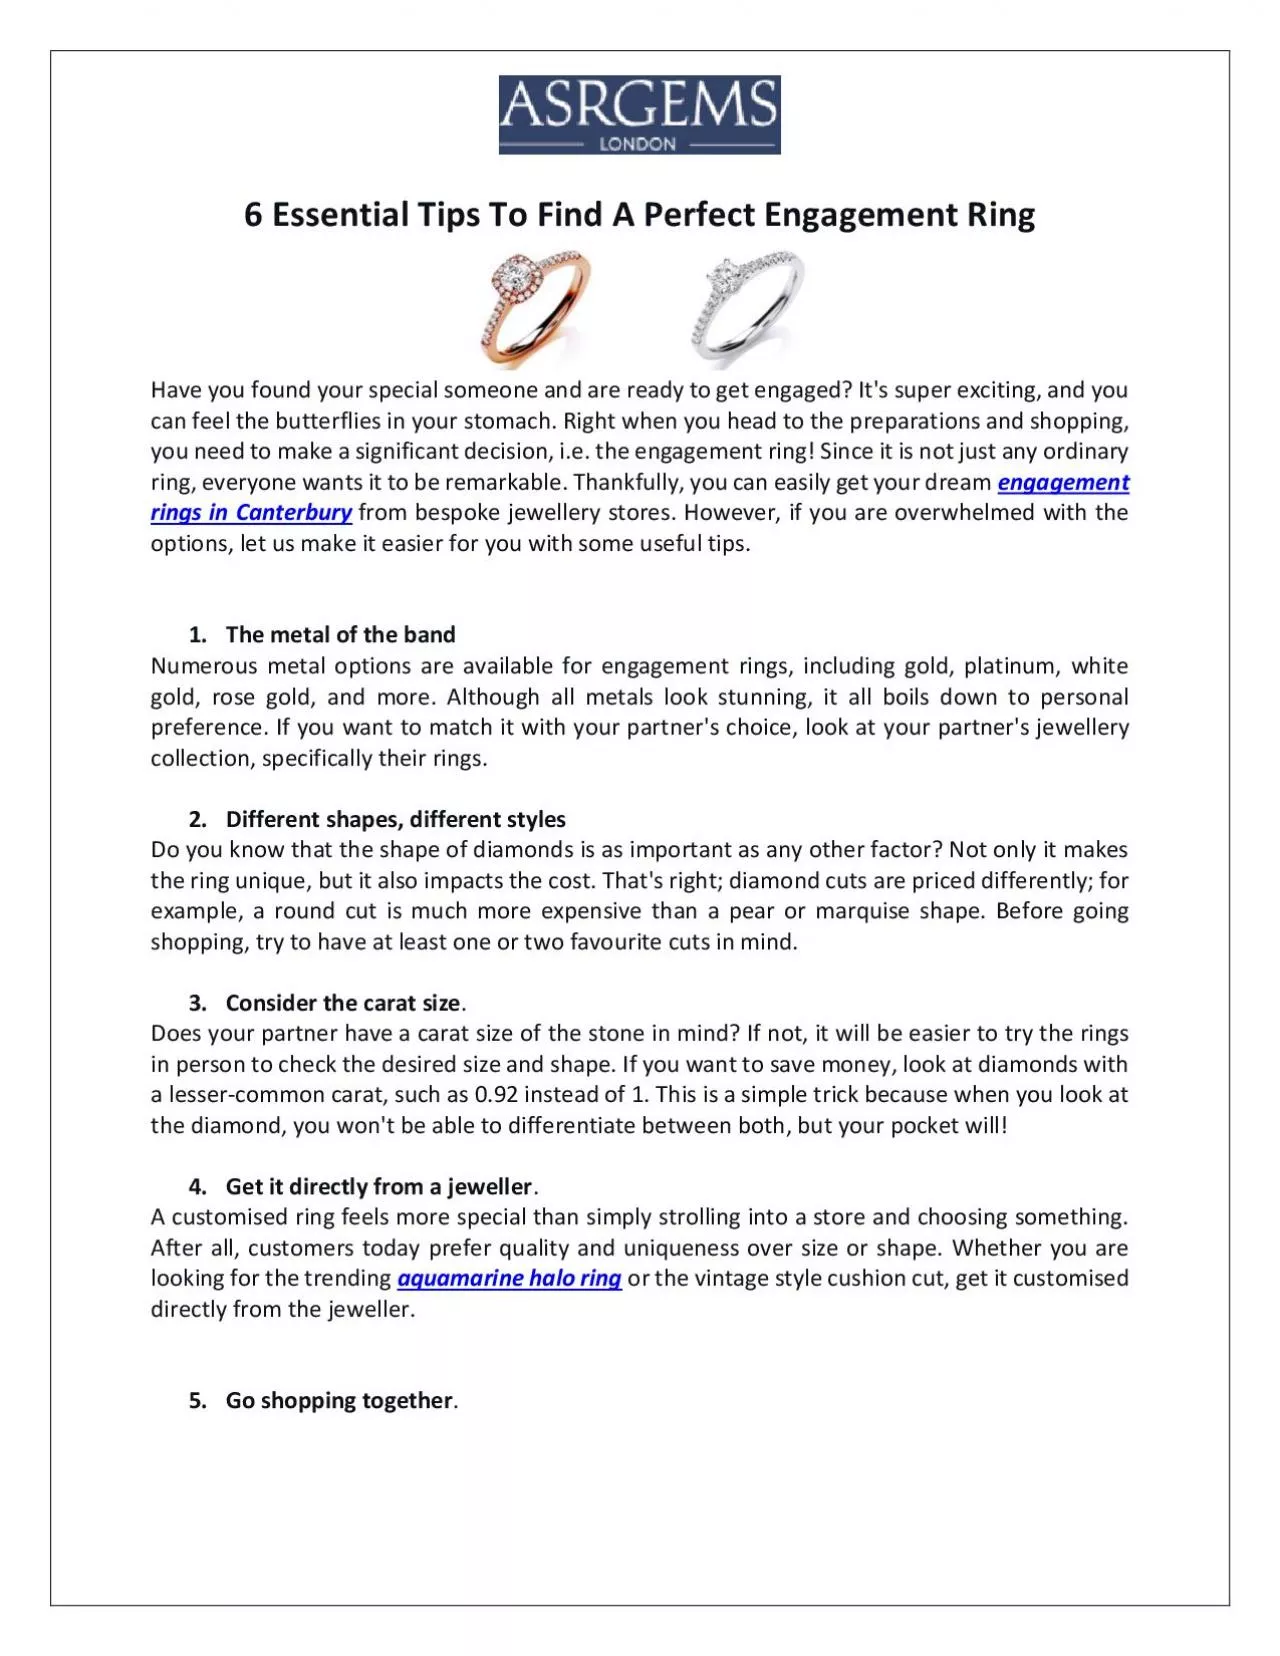 6 Essential Tips To Find A Perfect Engagement Ring